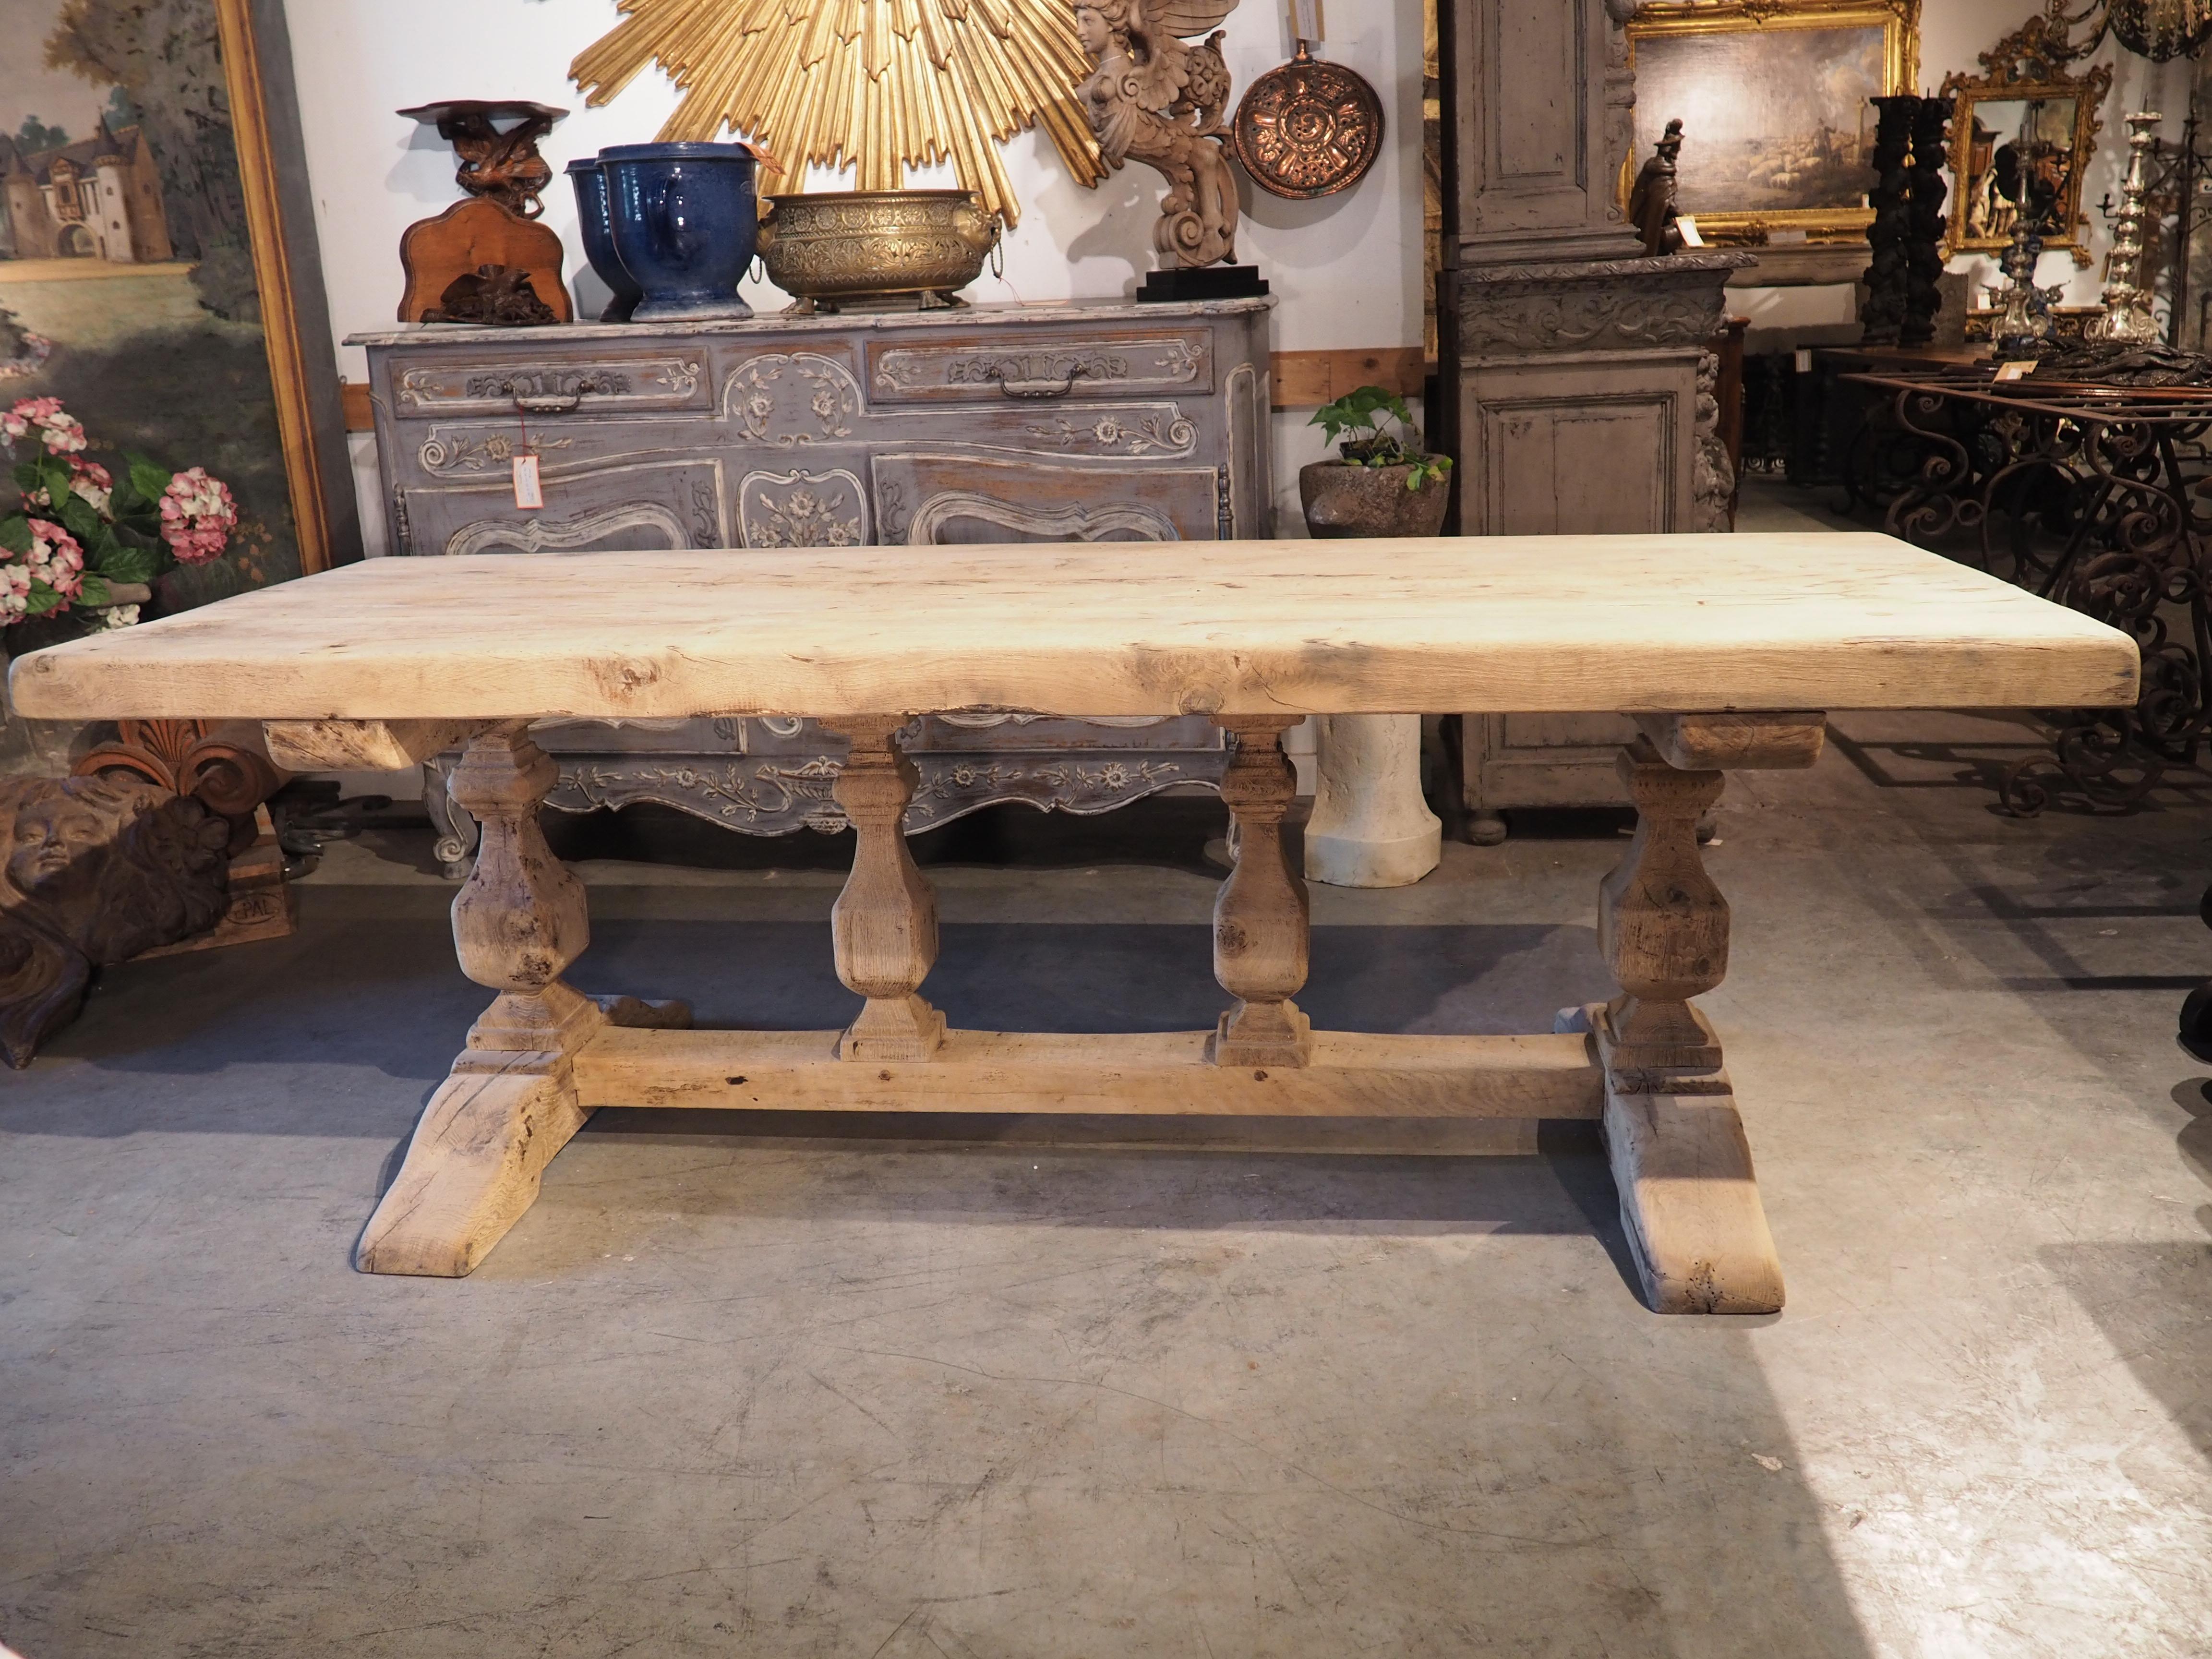 Early 1900s French Bleached Oak Monastery Table with Balustrade Stretcher 2